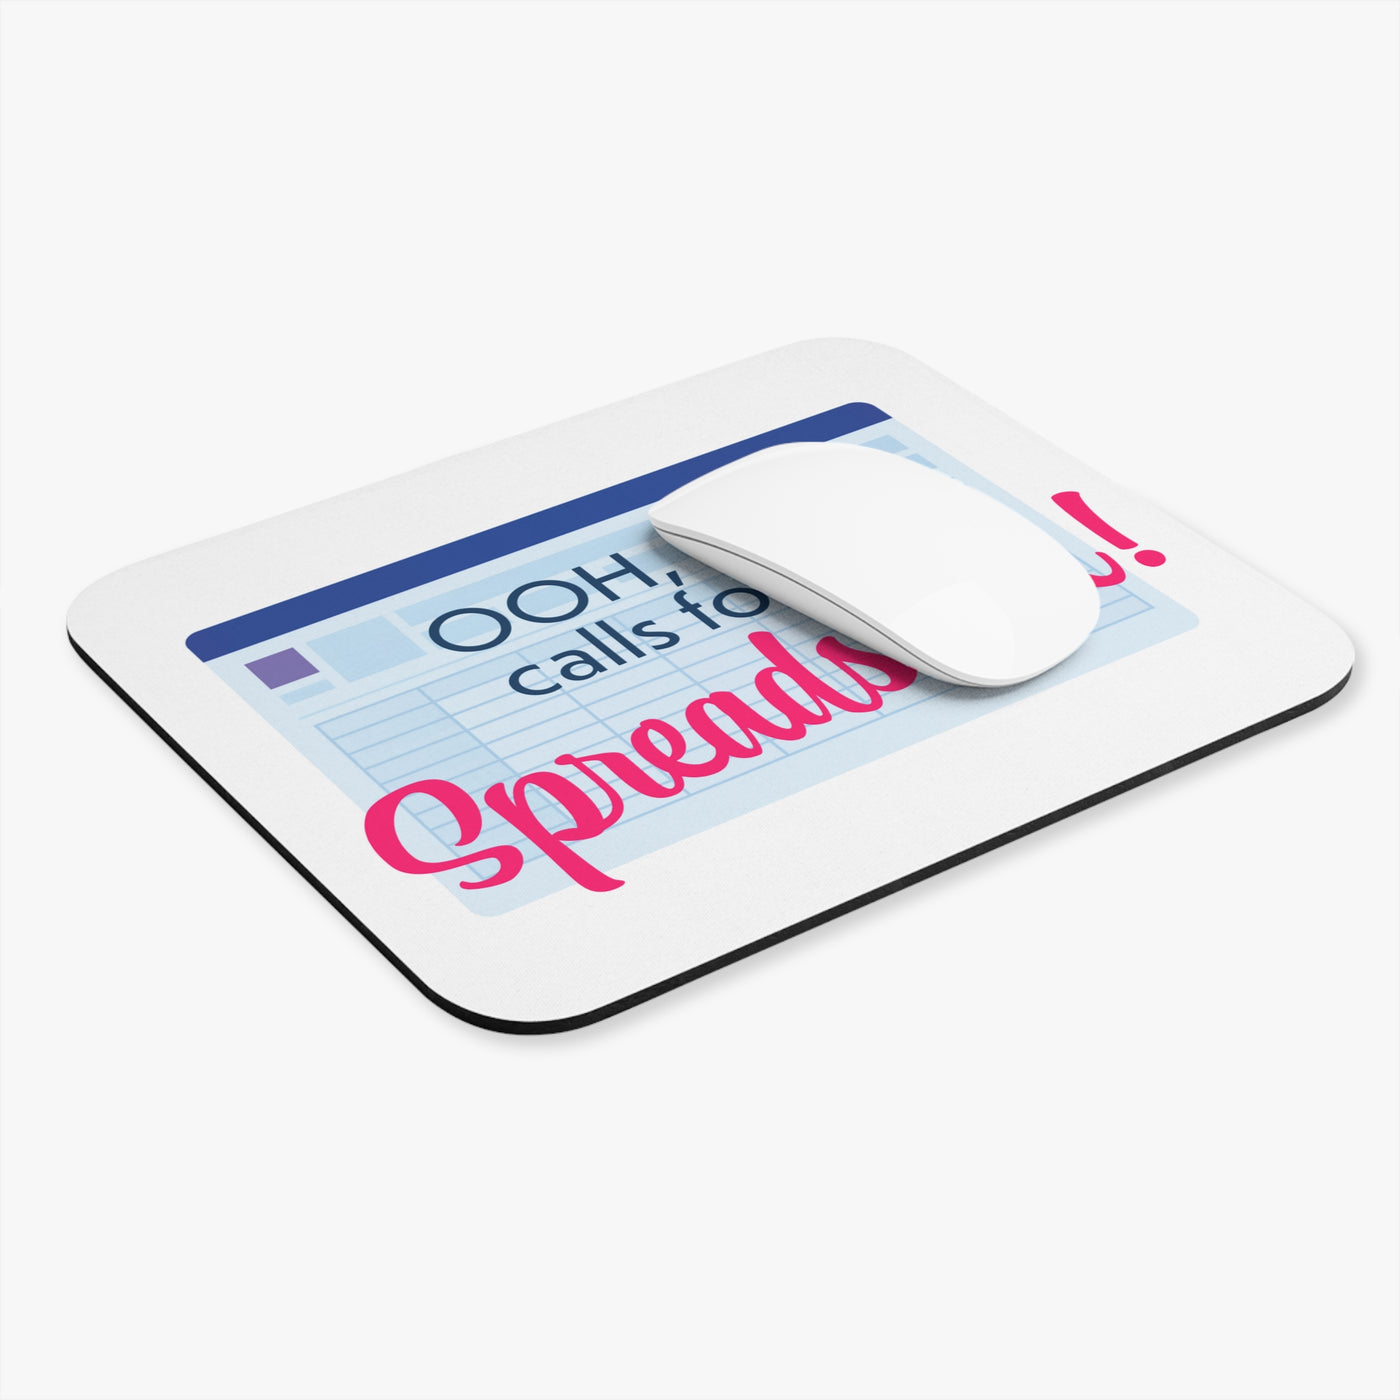 Ooh Spreadsheet - Mouse Pad 9x8